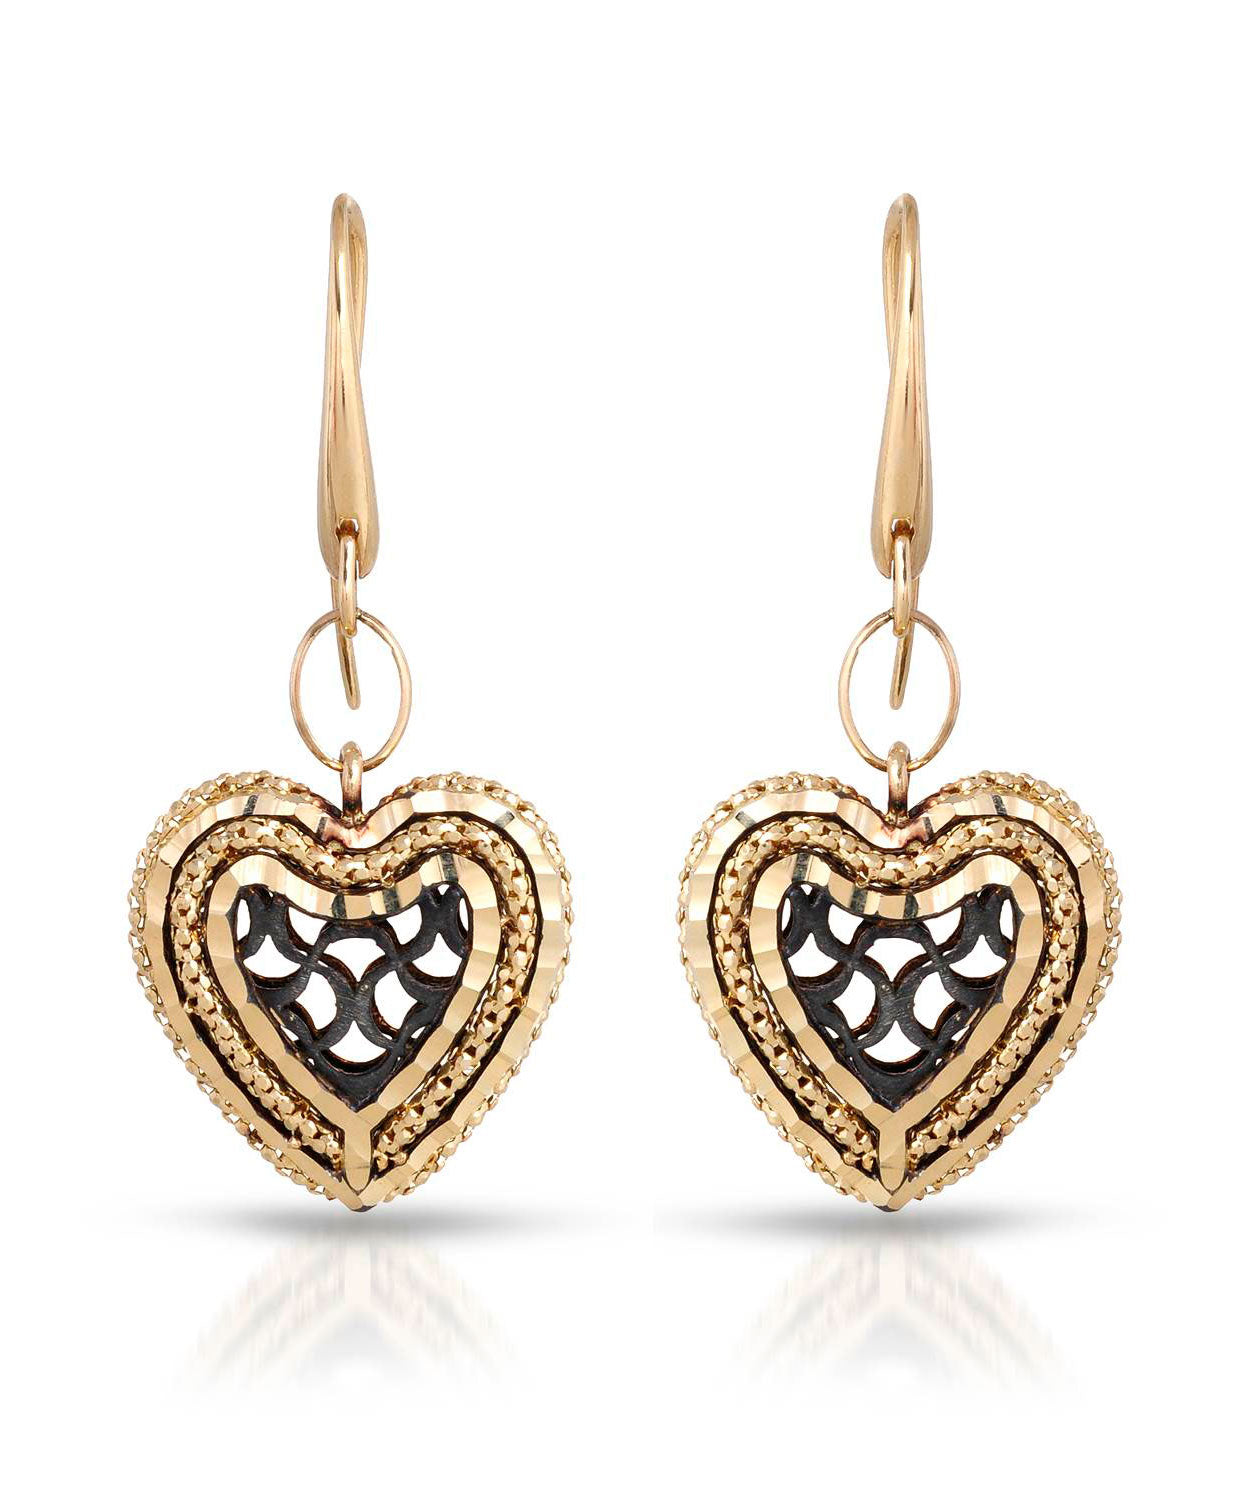 14k Gold Heart Dangle Earrings - Made in Italy View 1